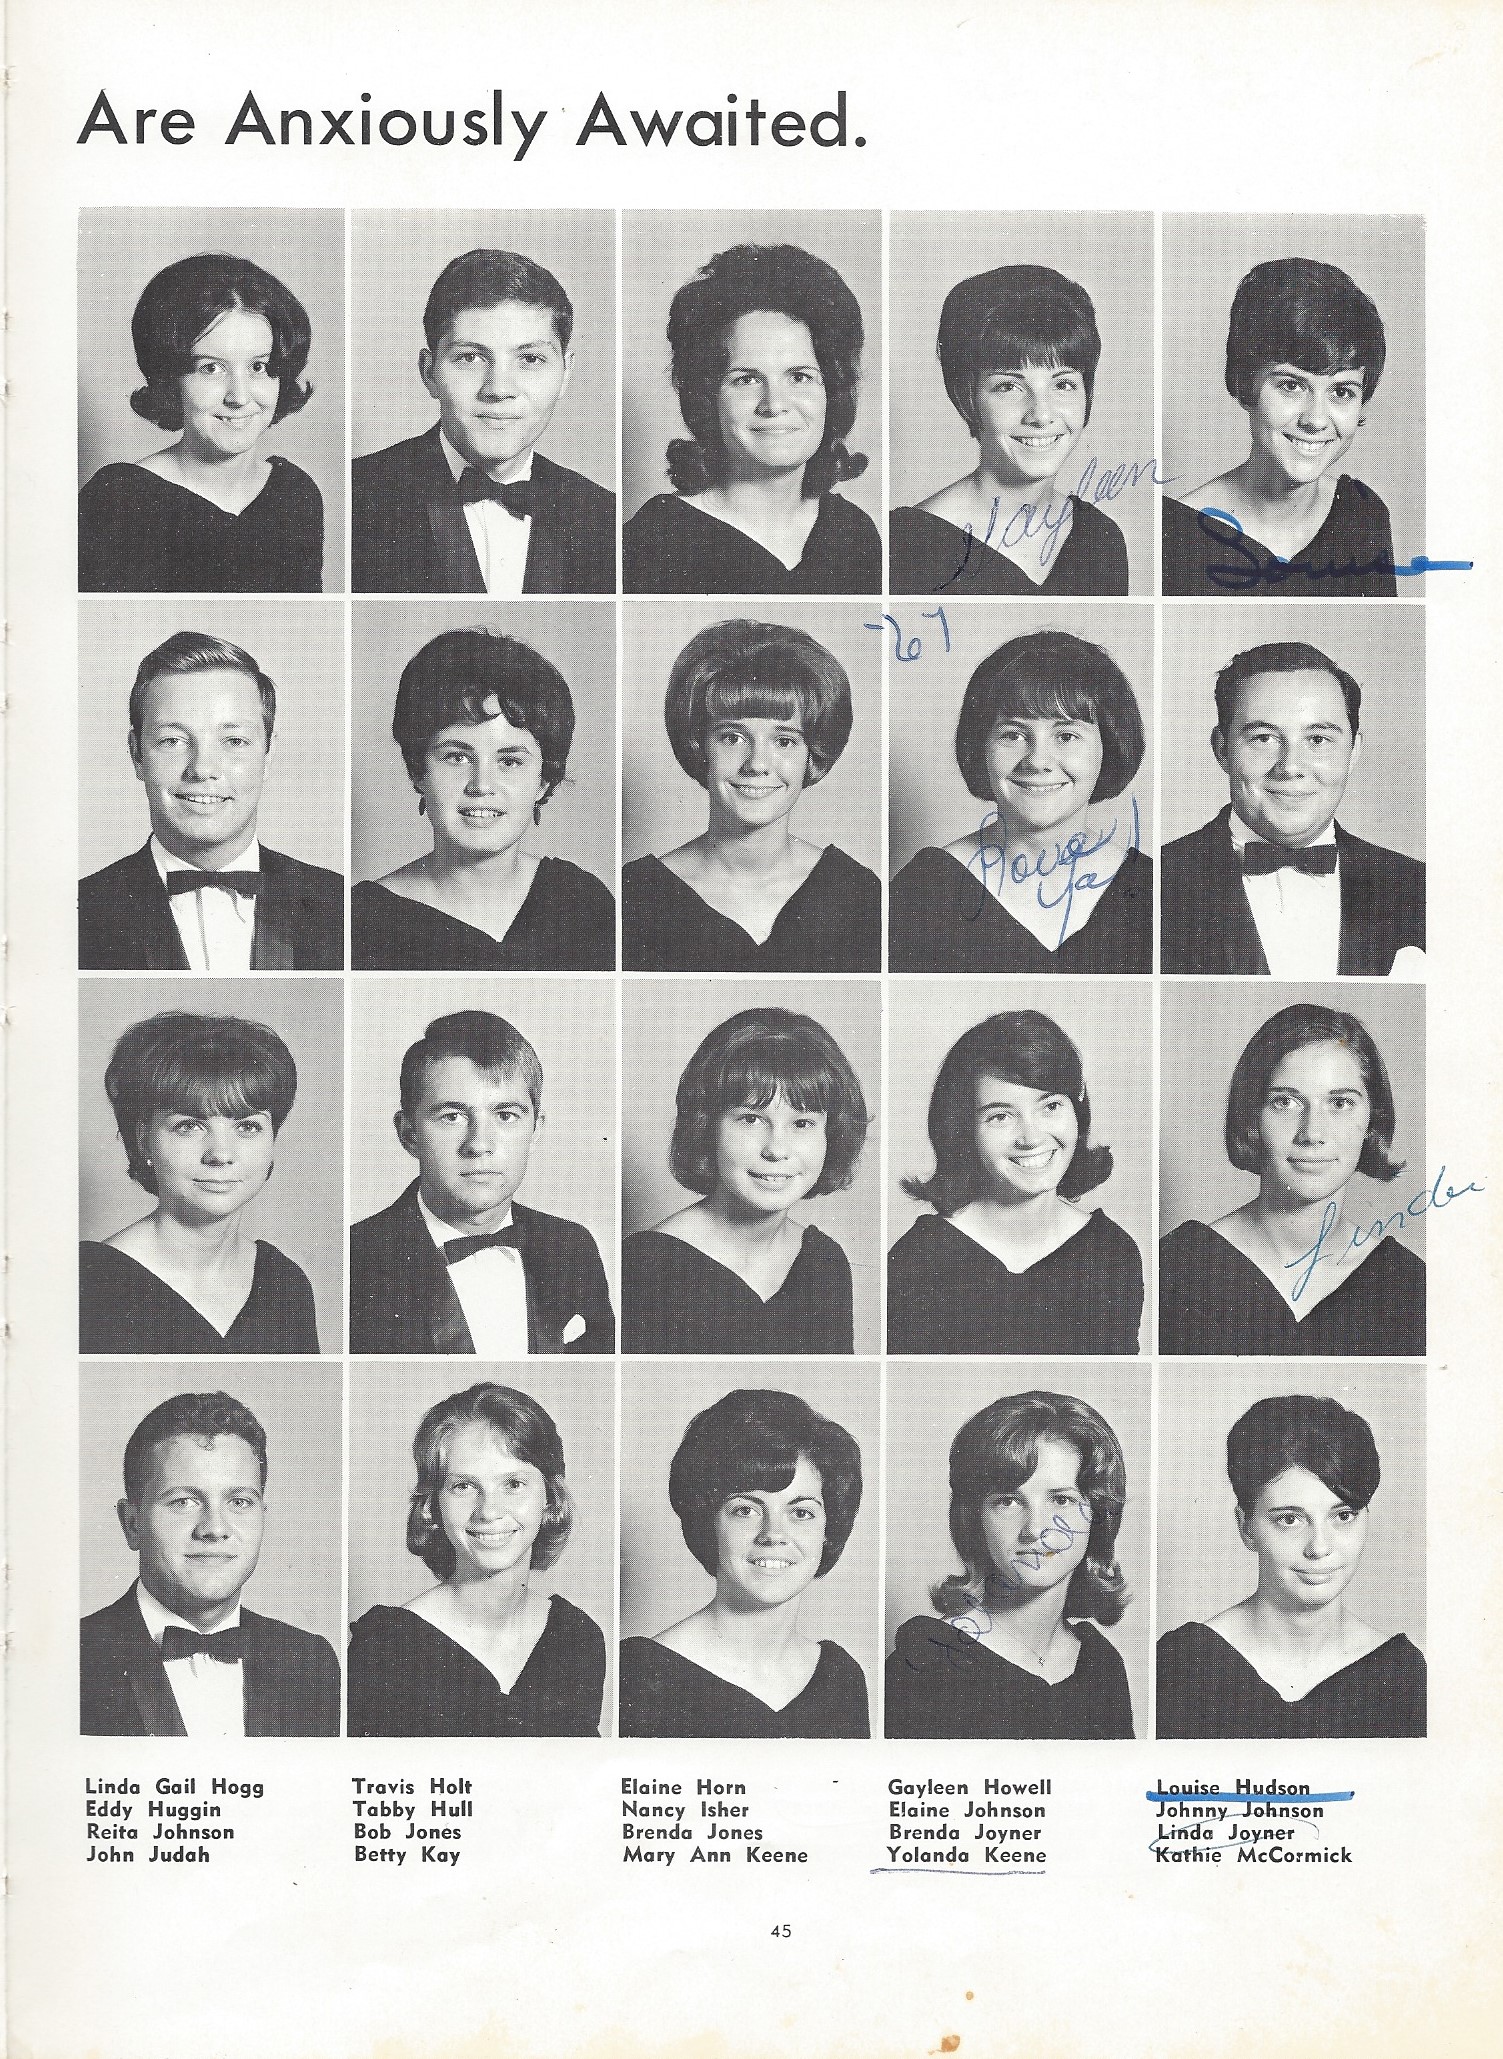 SENIORS(IN 1967) (click on picture to zoom) 